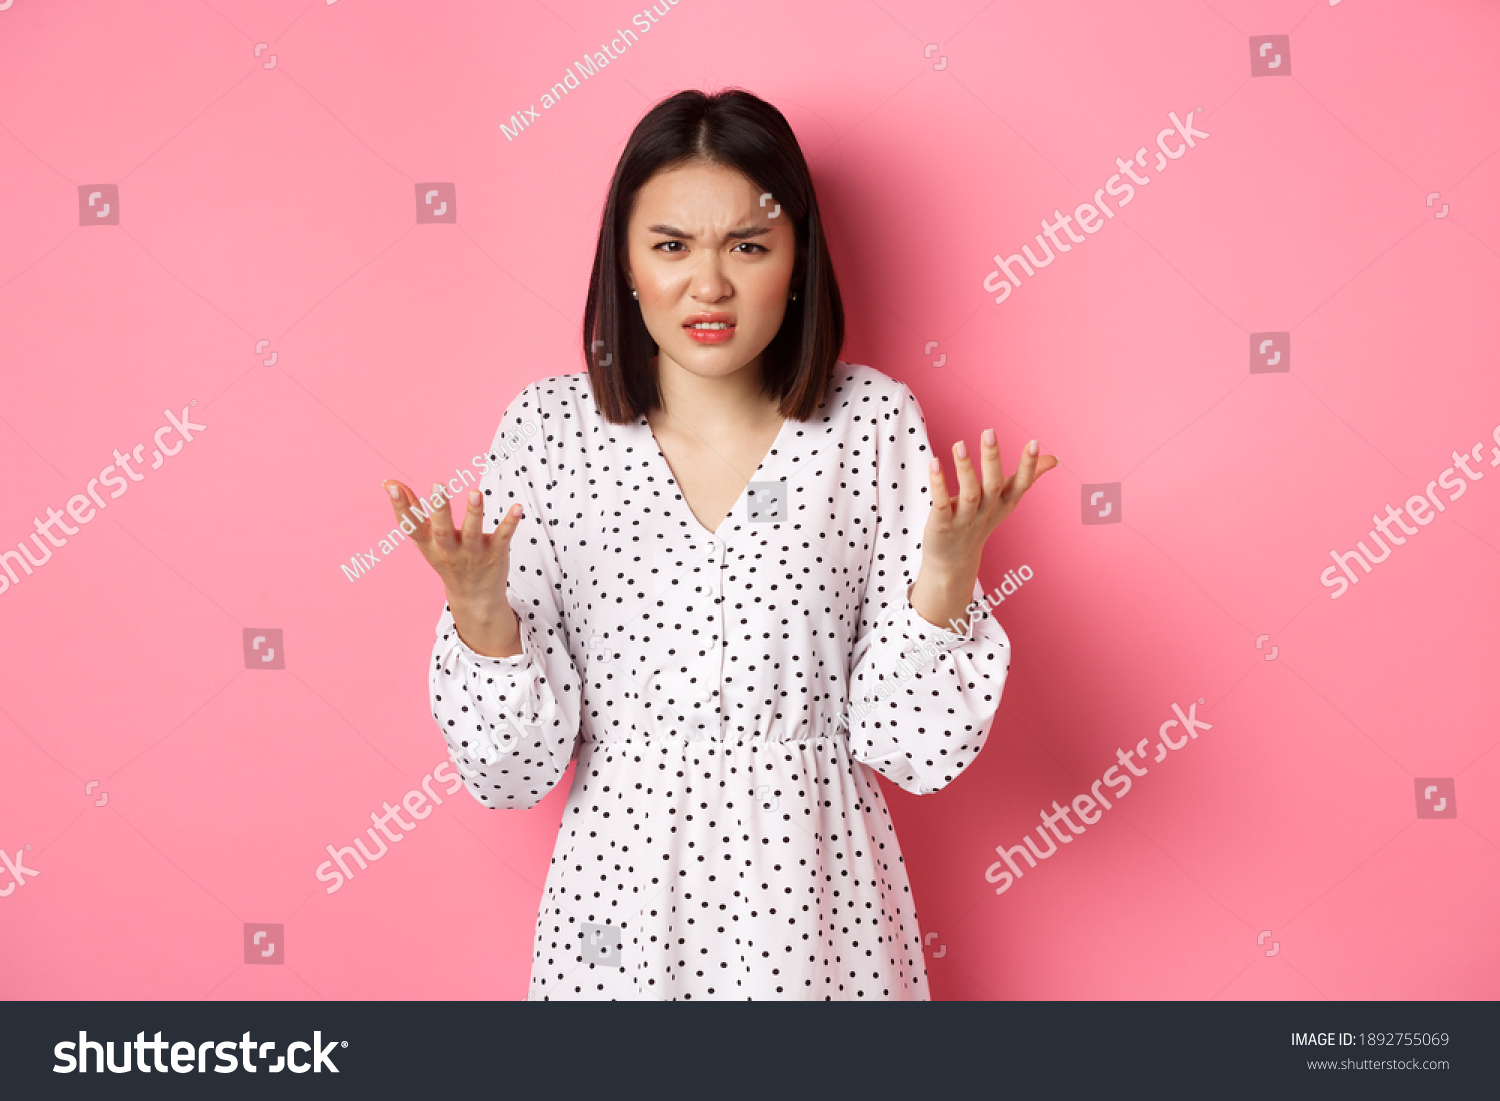 7,818 Angry woman asia Images, Stock Photos & Vectors | Shutterstock